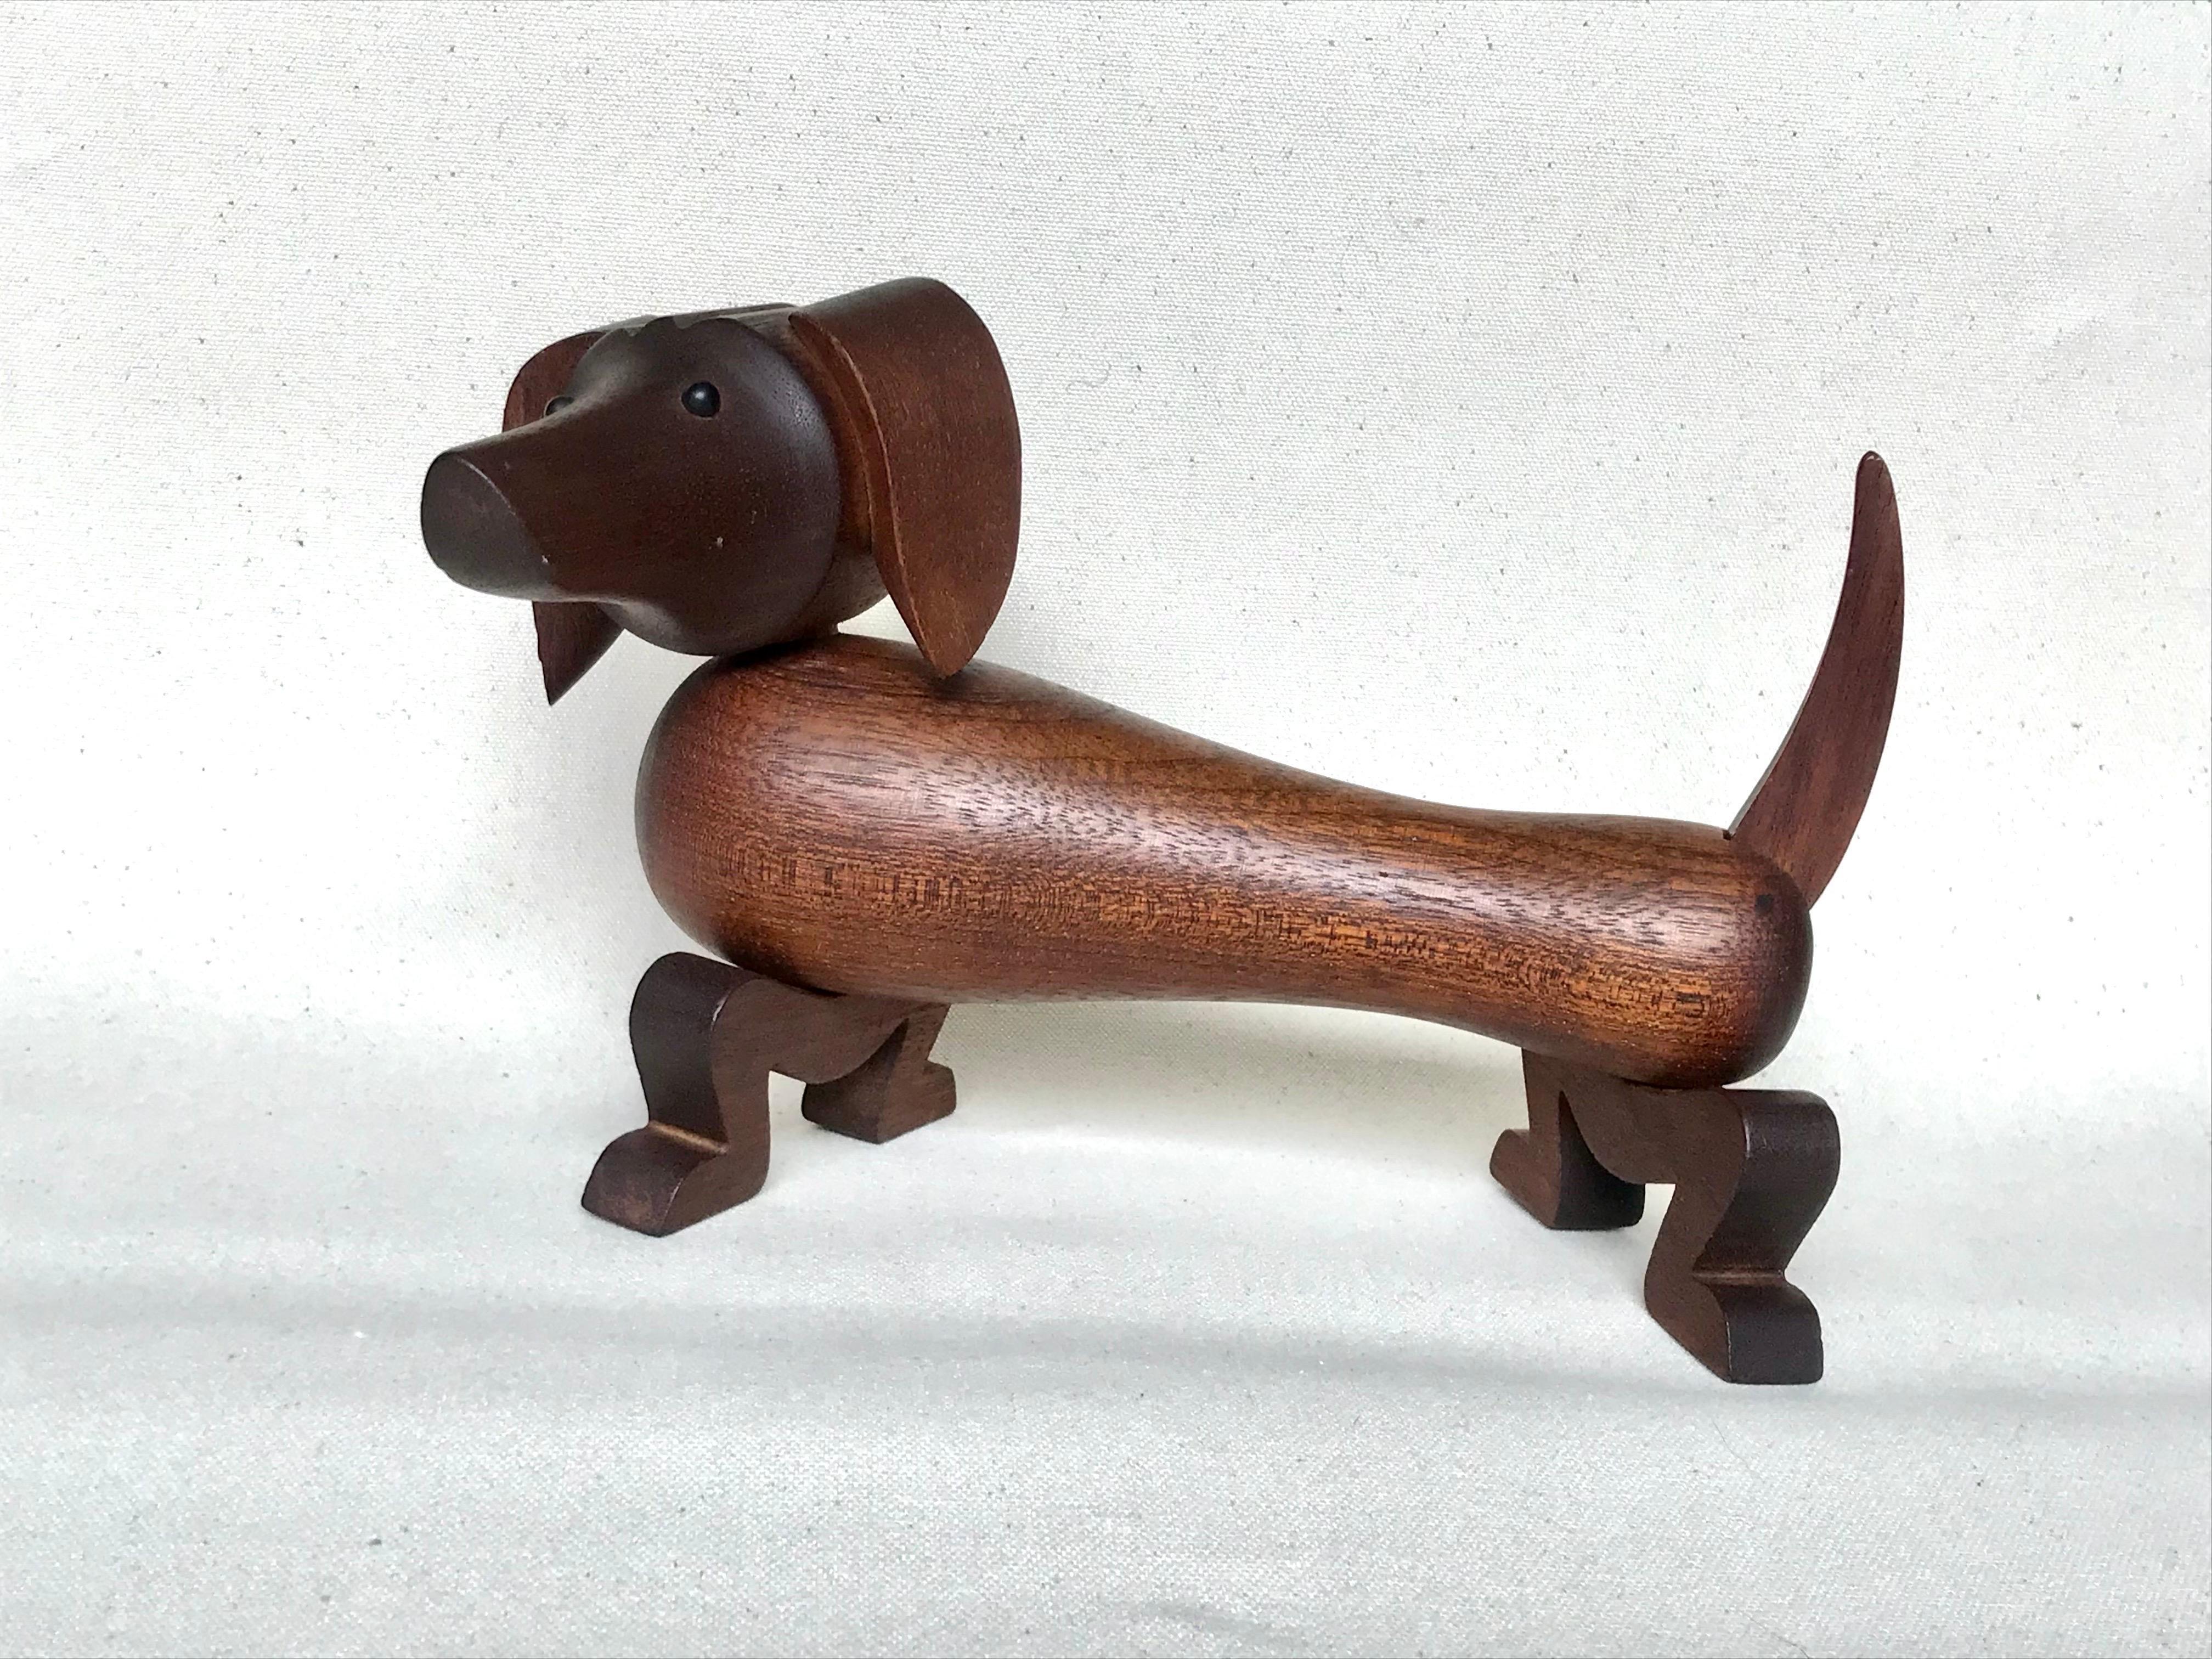 A playful danish modern design.
Early production piece.
Solid teak wood.
Head moves around, legs side to side and the tail up or down. 
Stamped 